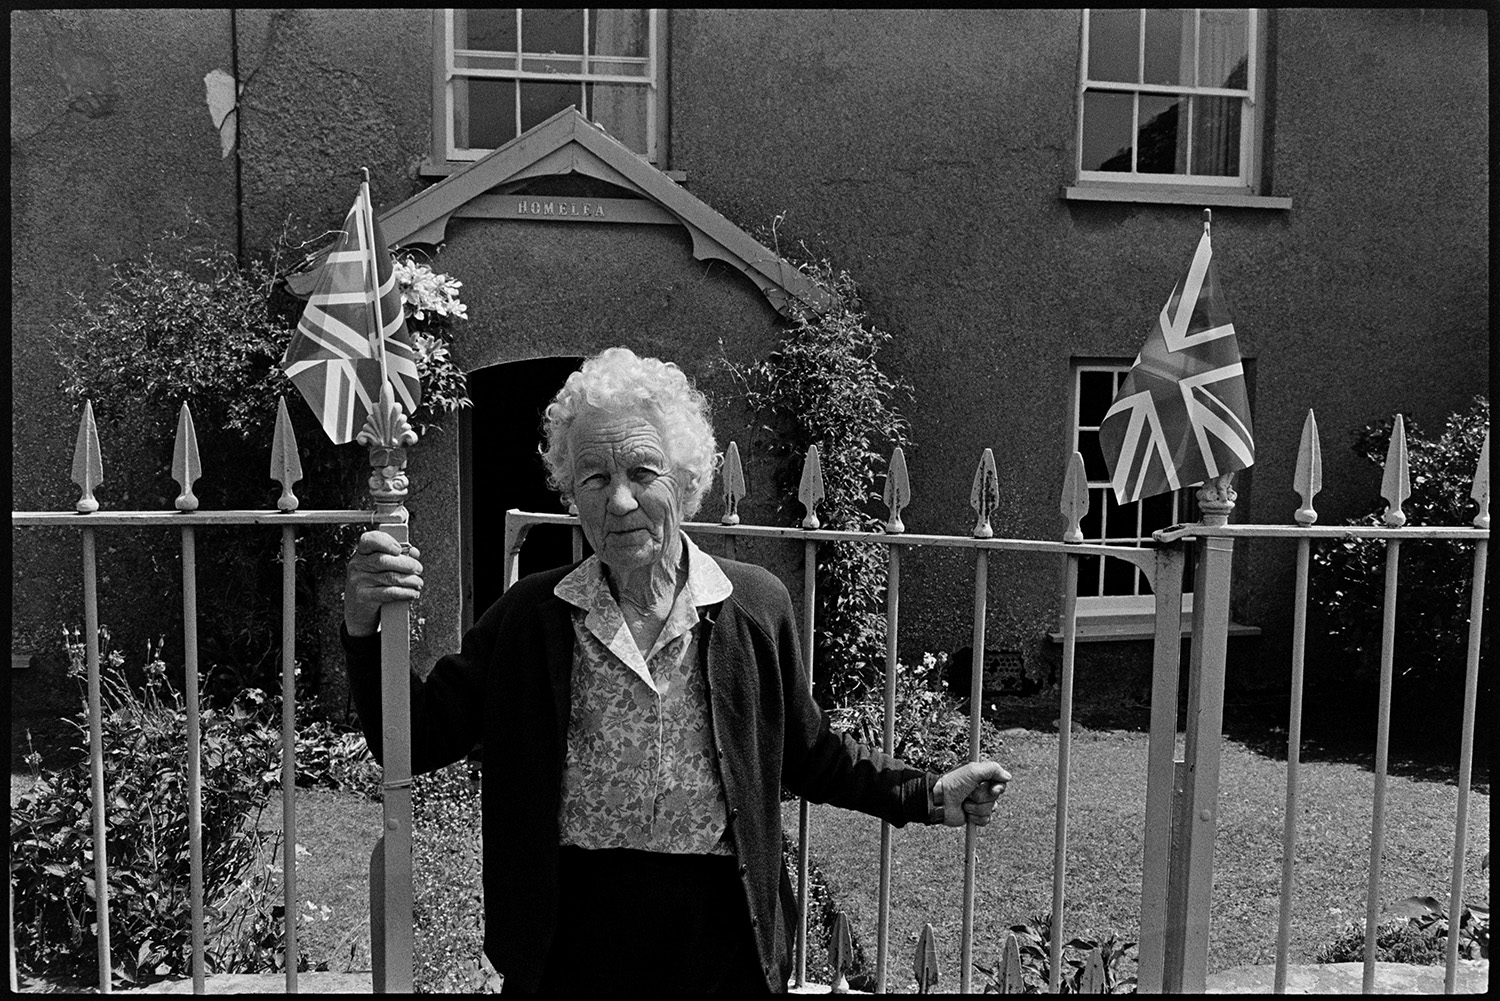 People chatting with flags, decorations for Jubilee. 
[Florence Heaman stood by the gates to Homelea cottage in Dolton. The gates are decorated with Union Jack flags for Queen Elizabeth II Silver Jubilee.]